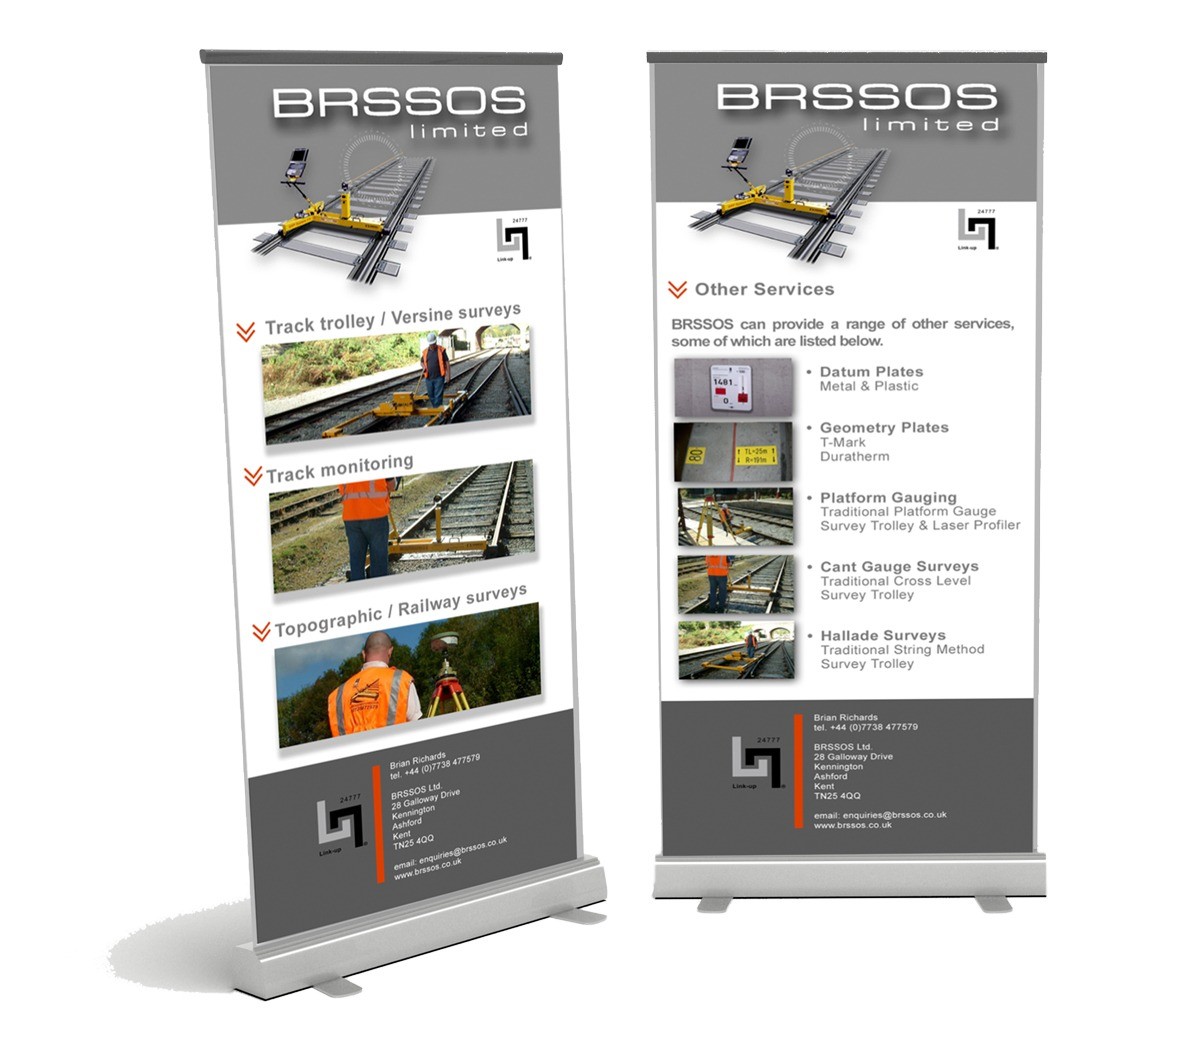 An image showing the exhibition pull up banners designed for BROSSOS.